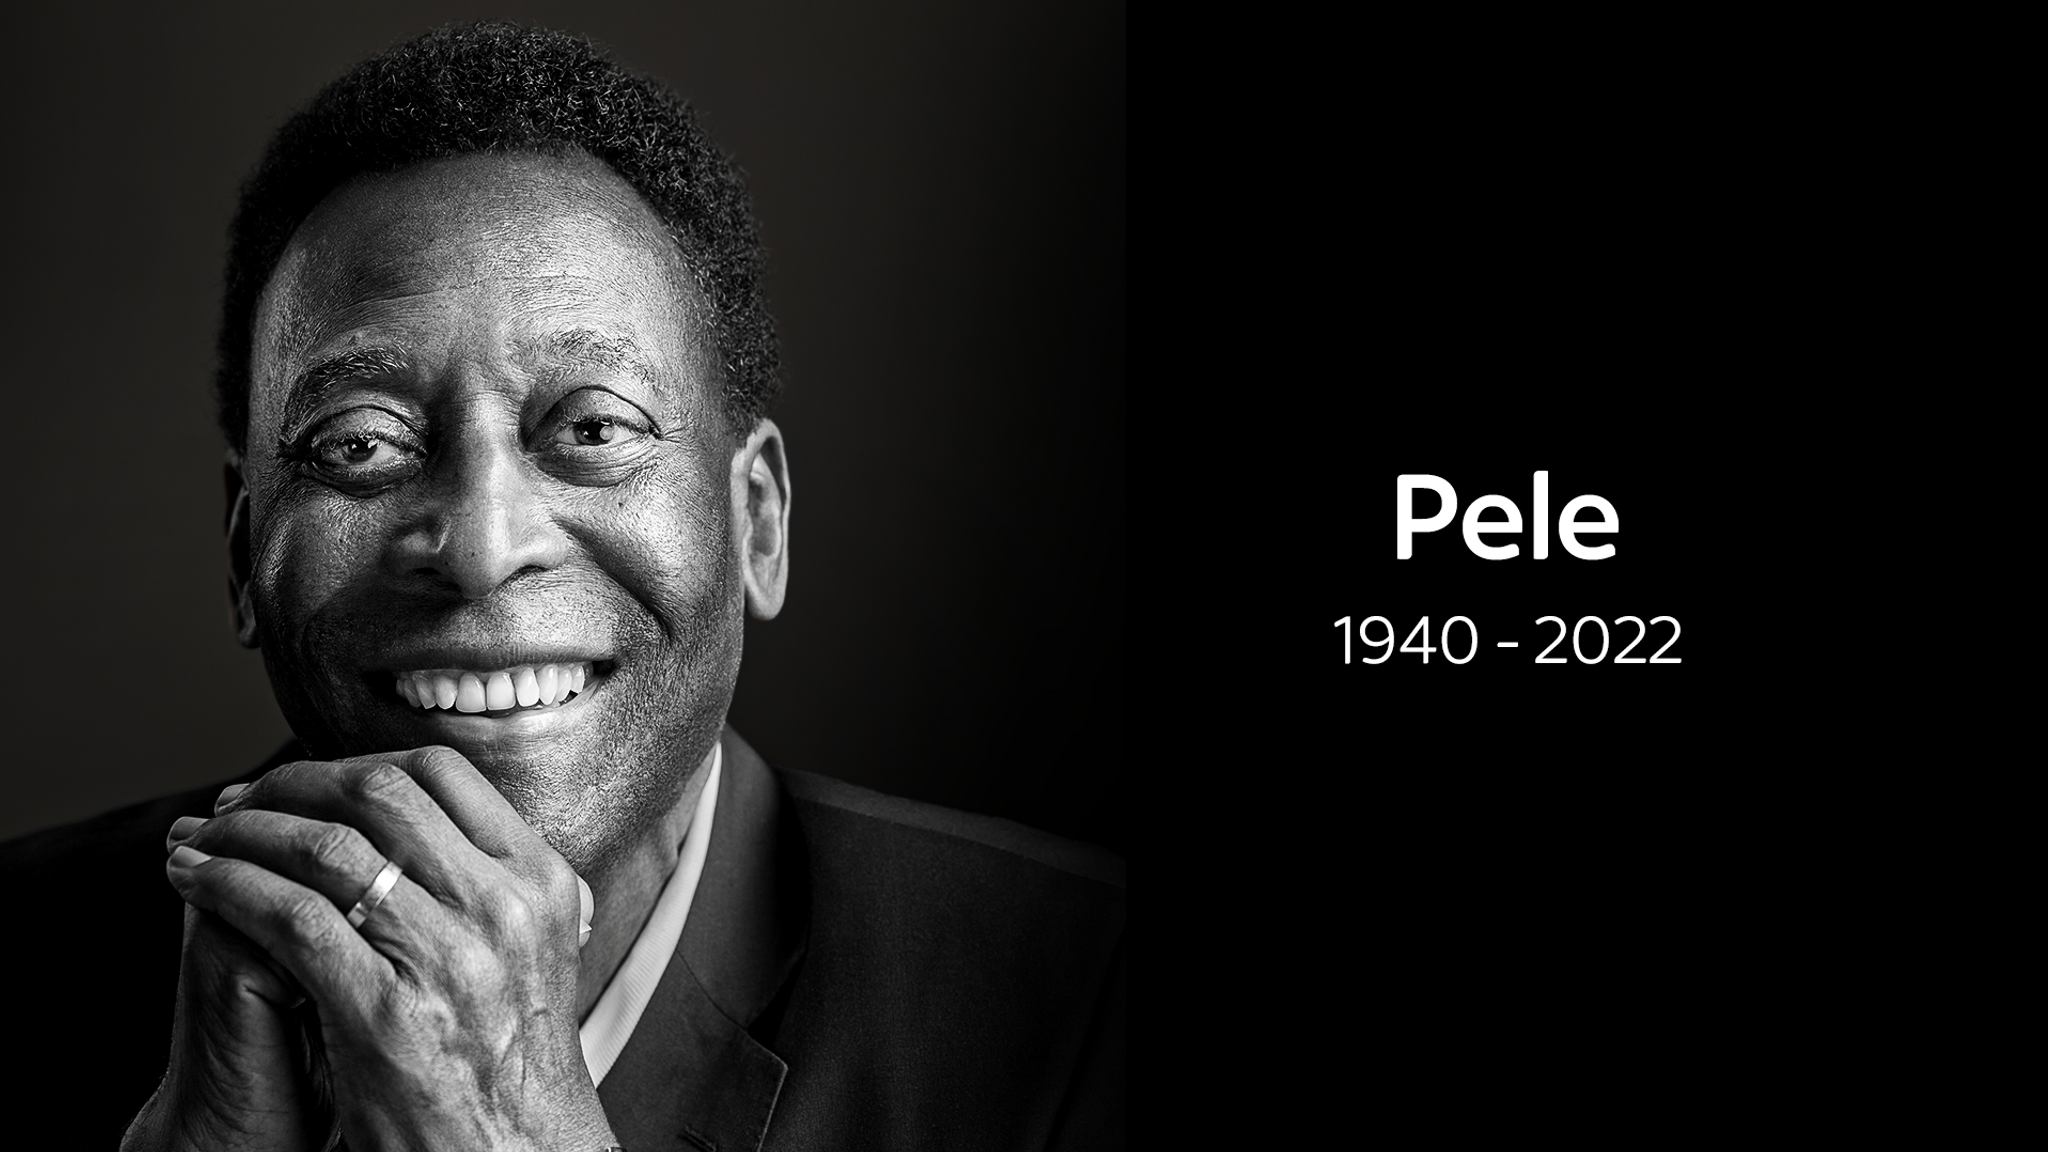 Pele, ‘The King of Football’, dies at age 82, tributes poured in